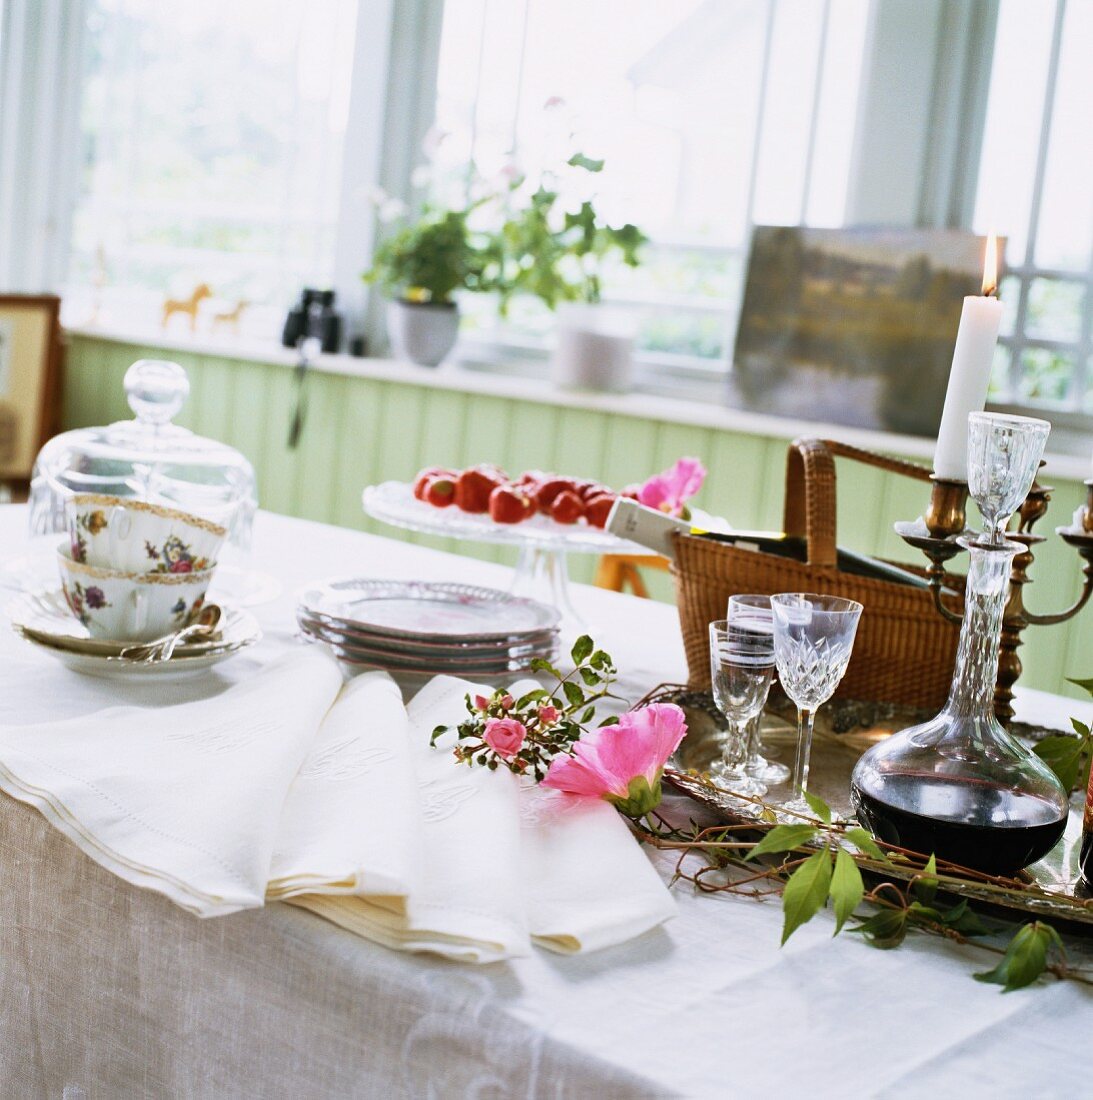 Coffee service and crystal carafe of liqueur on table with white tablecloth